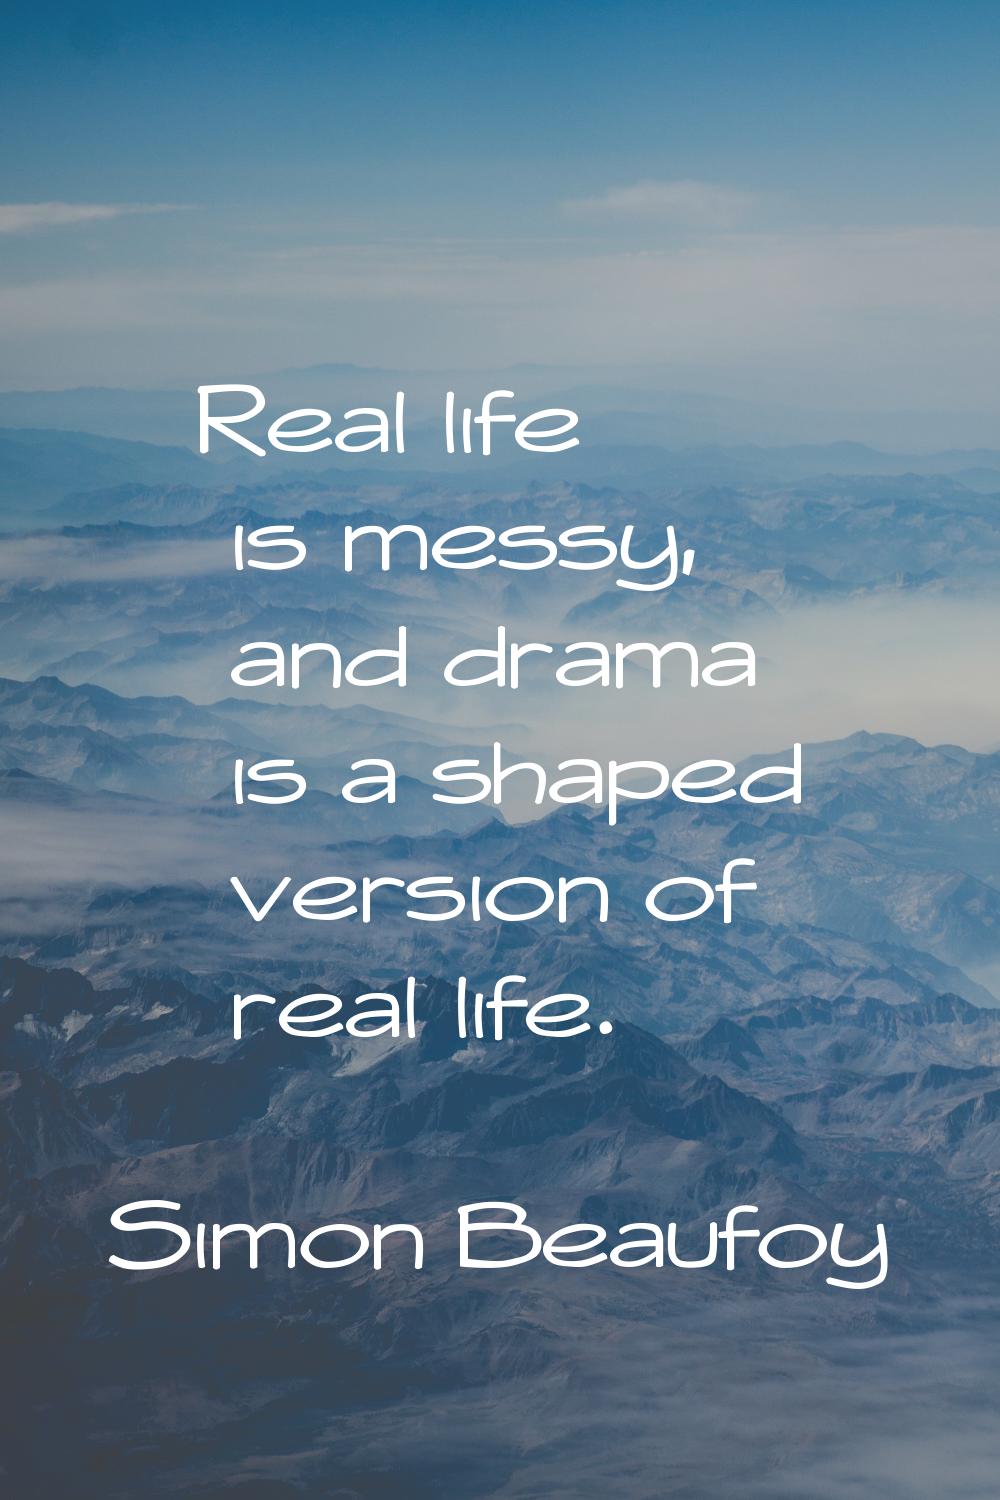 Real life is messy, and drama is a shaped version of real life.